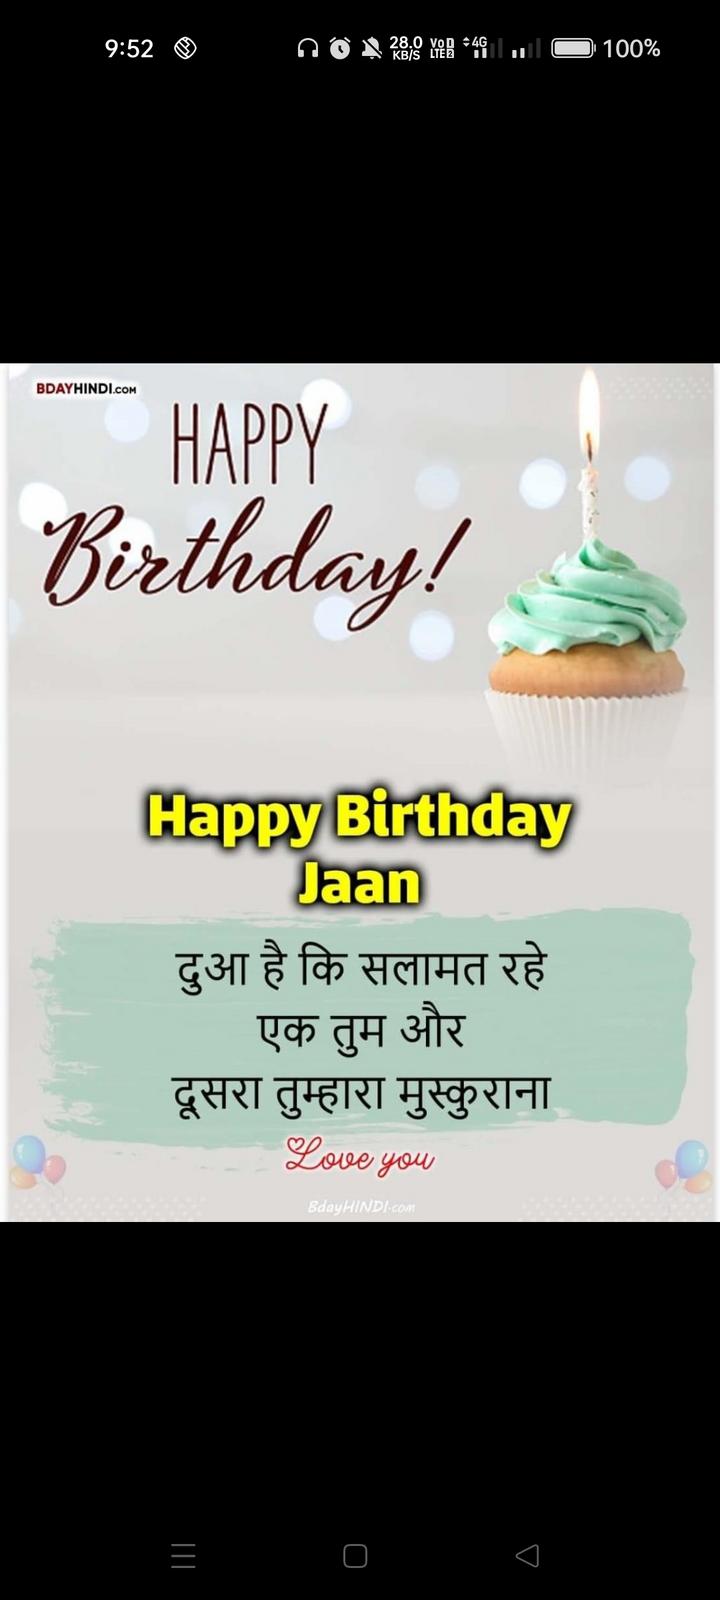 Happy Birthday Jan! - Cake 🎂 - Greetings Cards for Birthday for Jan -  messageswishesgreetings.com